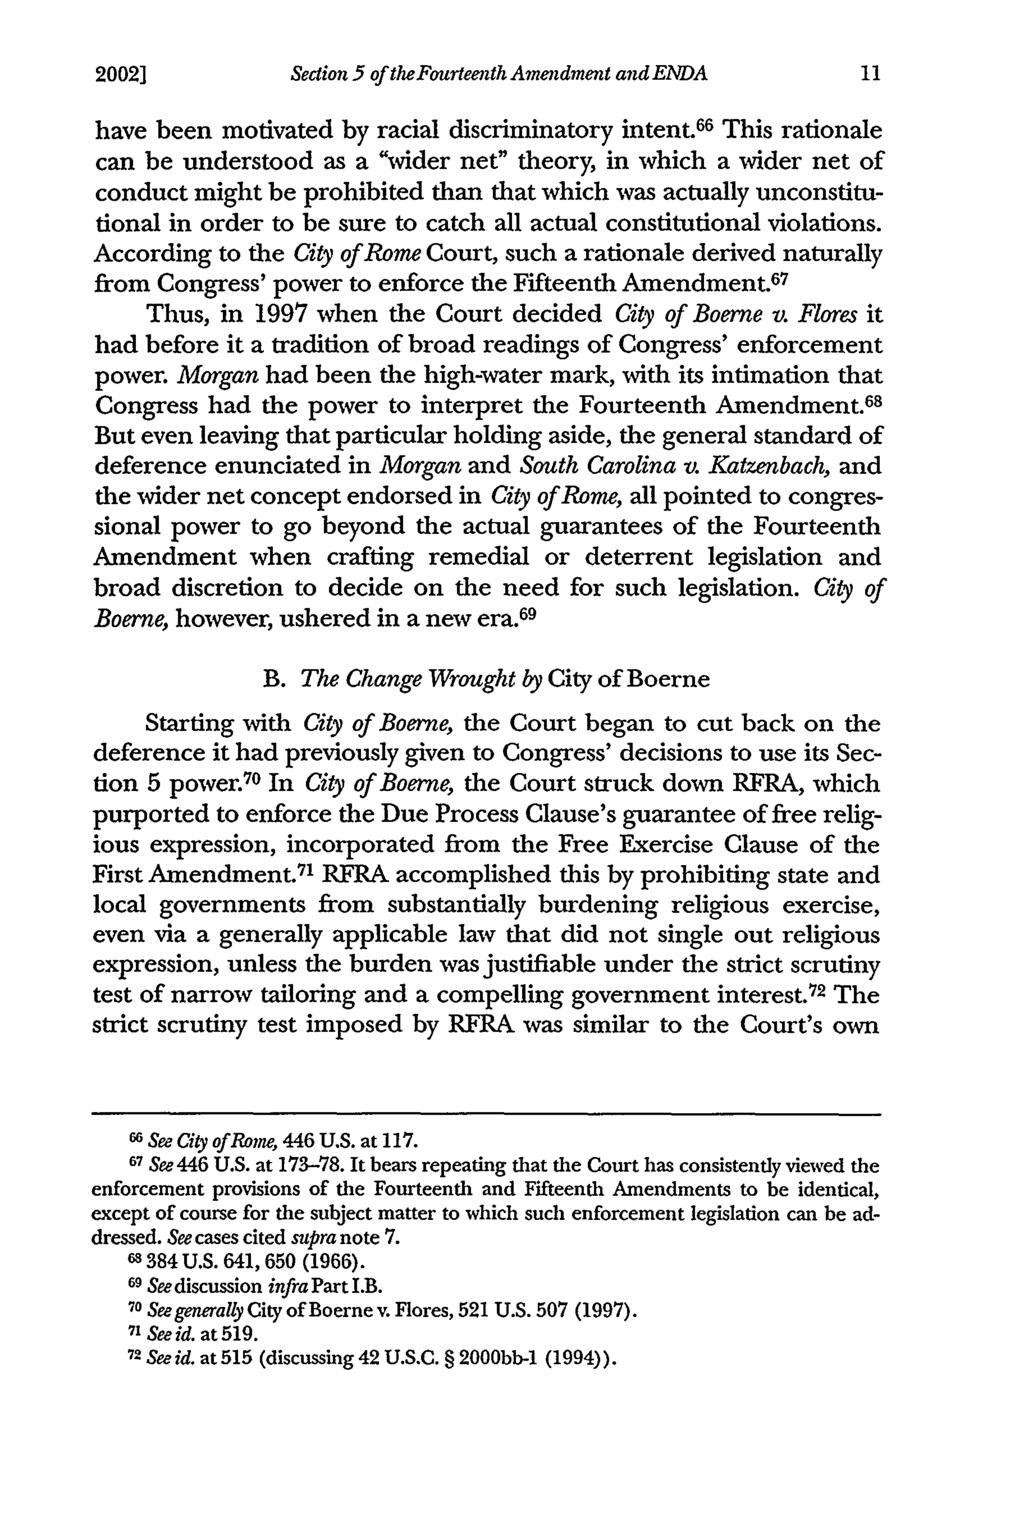 2002] Section 5 ofthefourteenth Amendment and ENDA have been motivated by racial discriminatory intent 66 This rationale can be understood as a "wider net" theory, in which a wider net of conduct